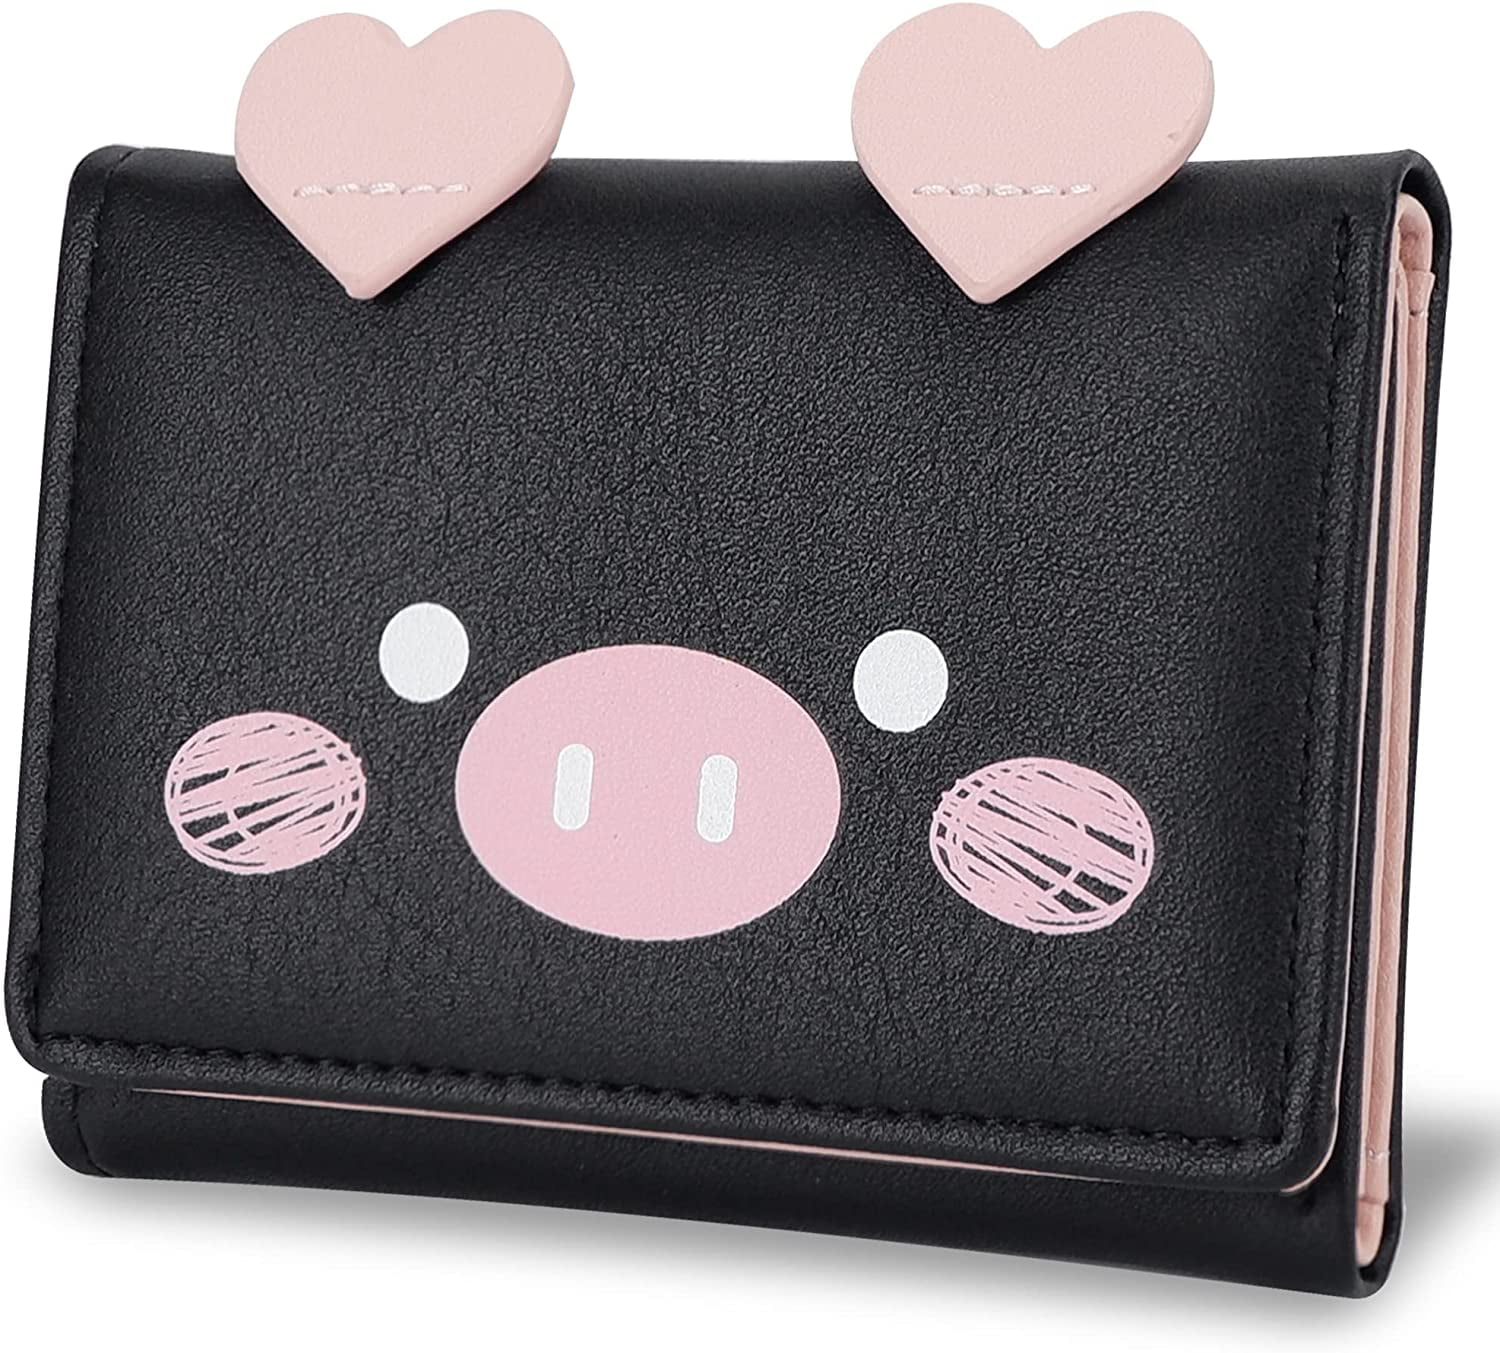 Pig and Heart Pattern Wallet Coin Purse Canvas Zipper Money Card for Birthday